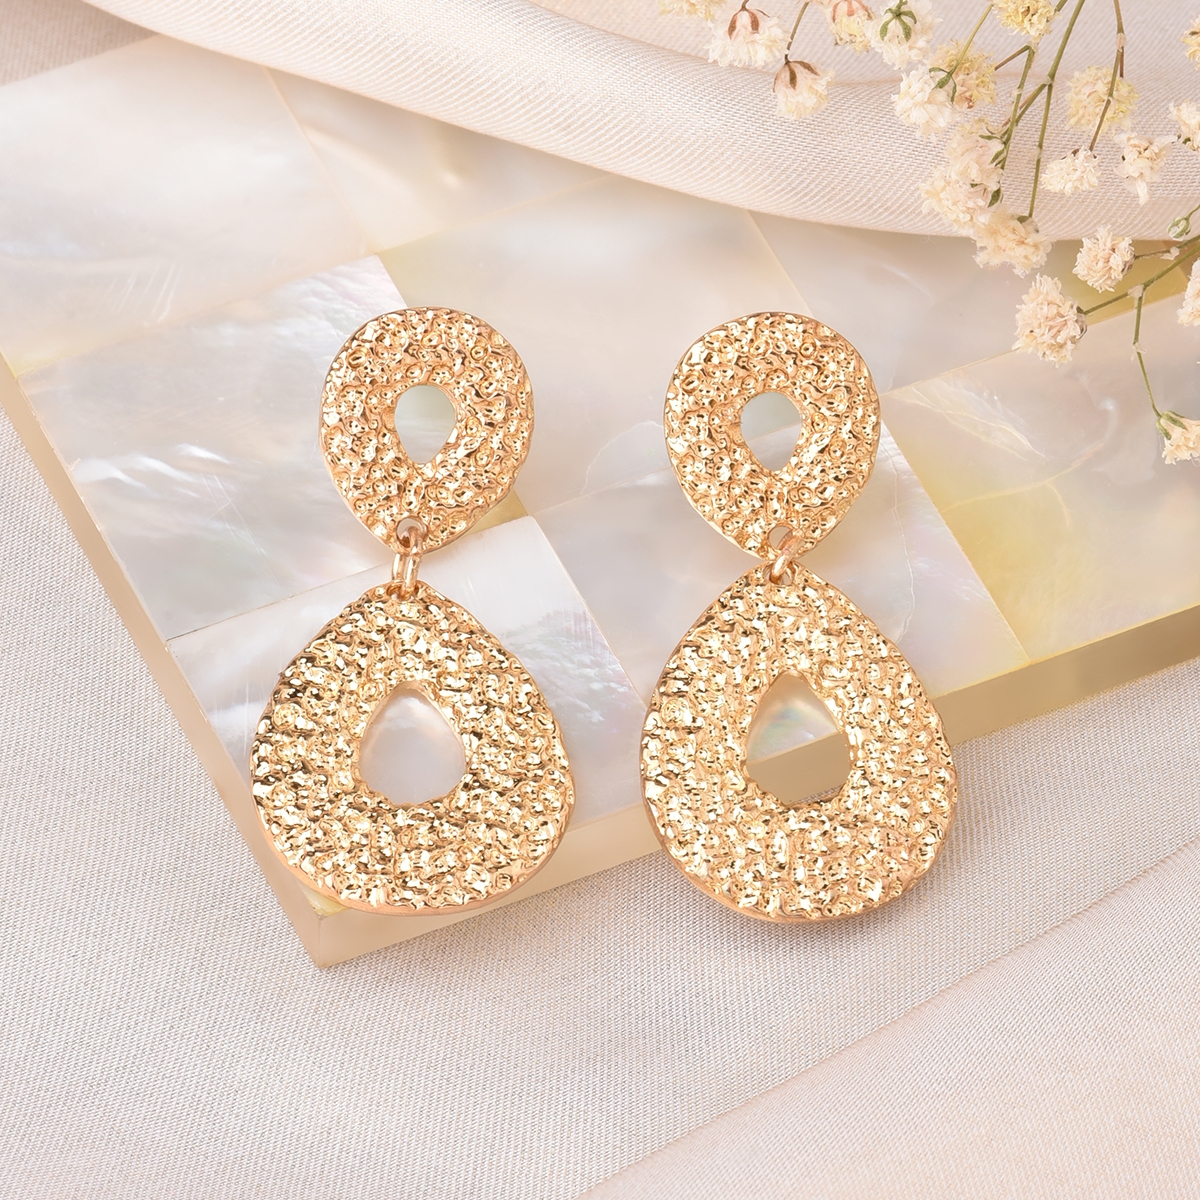 Lilly & sparkle | Lilly & Sparkle Gold Toned Drop Shaped Textured Dangler Earrings